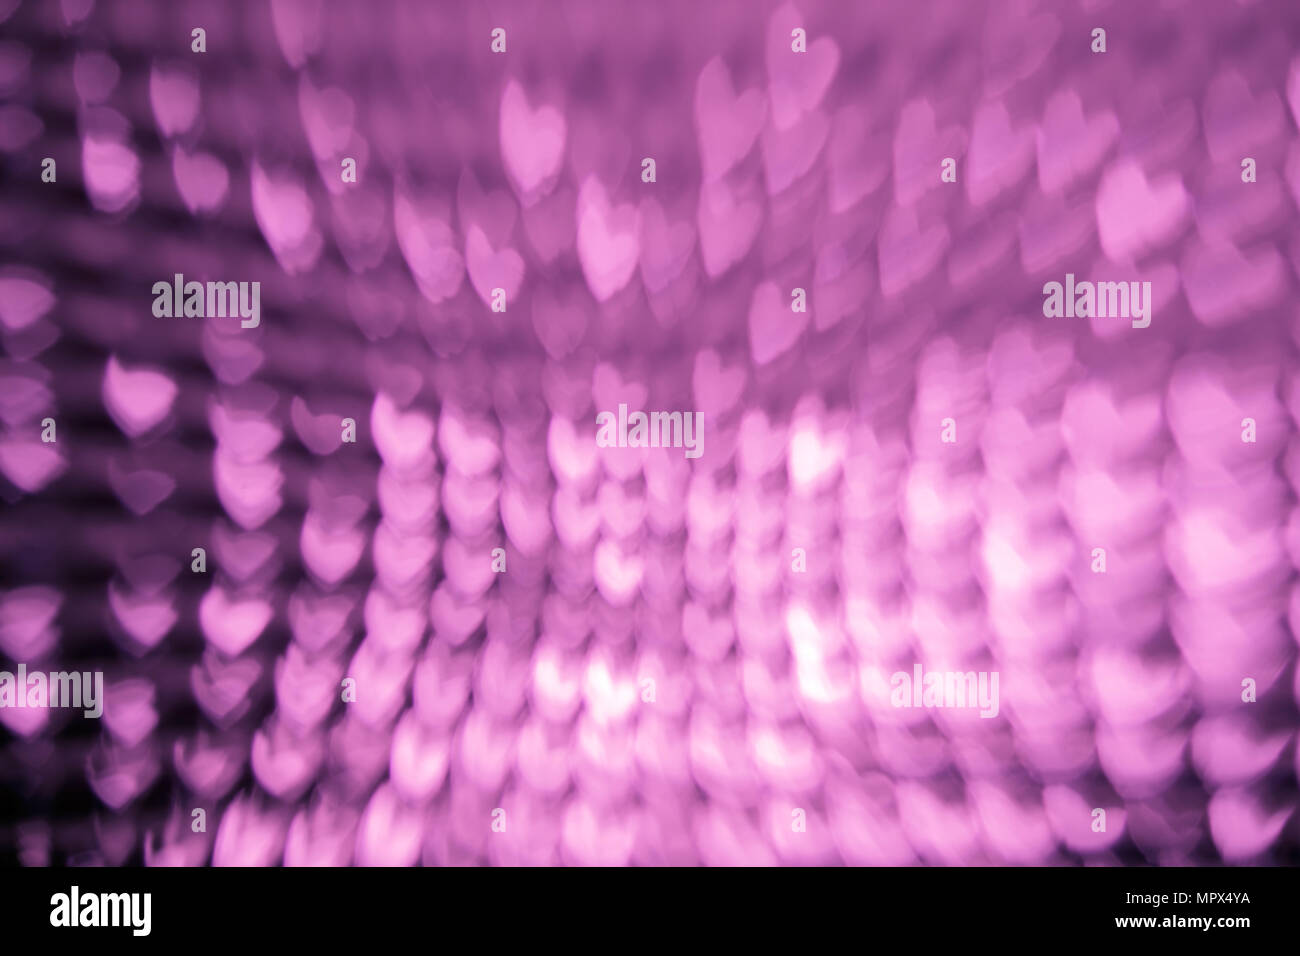 Abstract blur background with heart shaped. Violet tone. Stock Photo